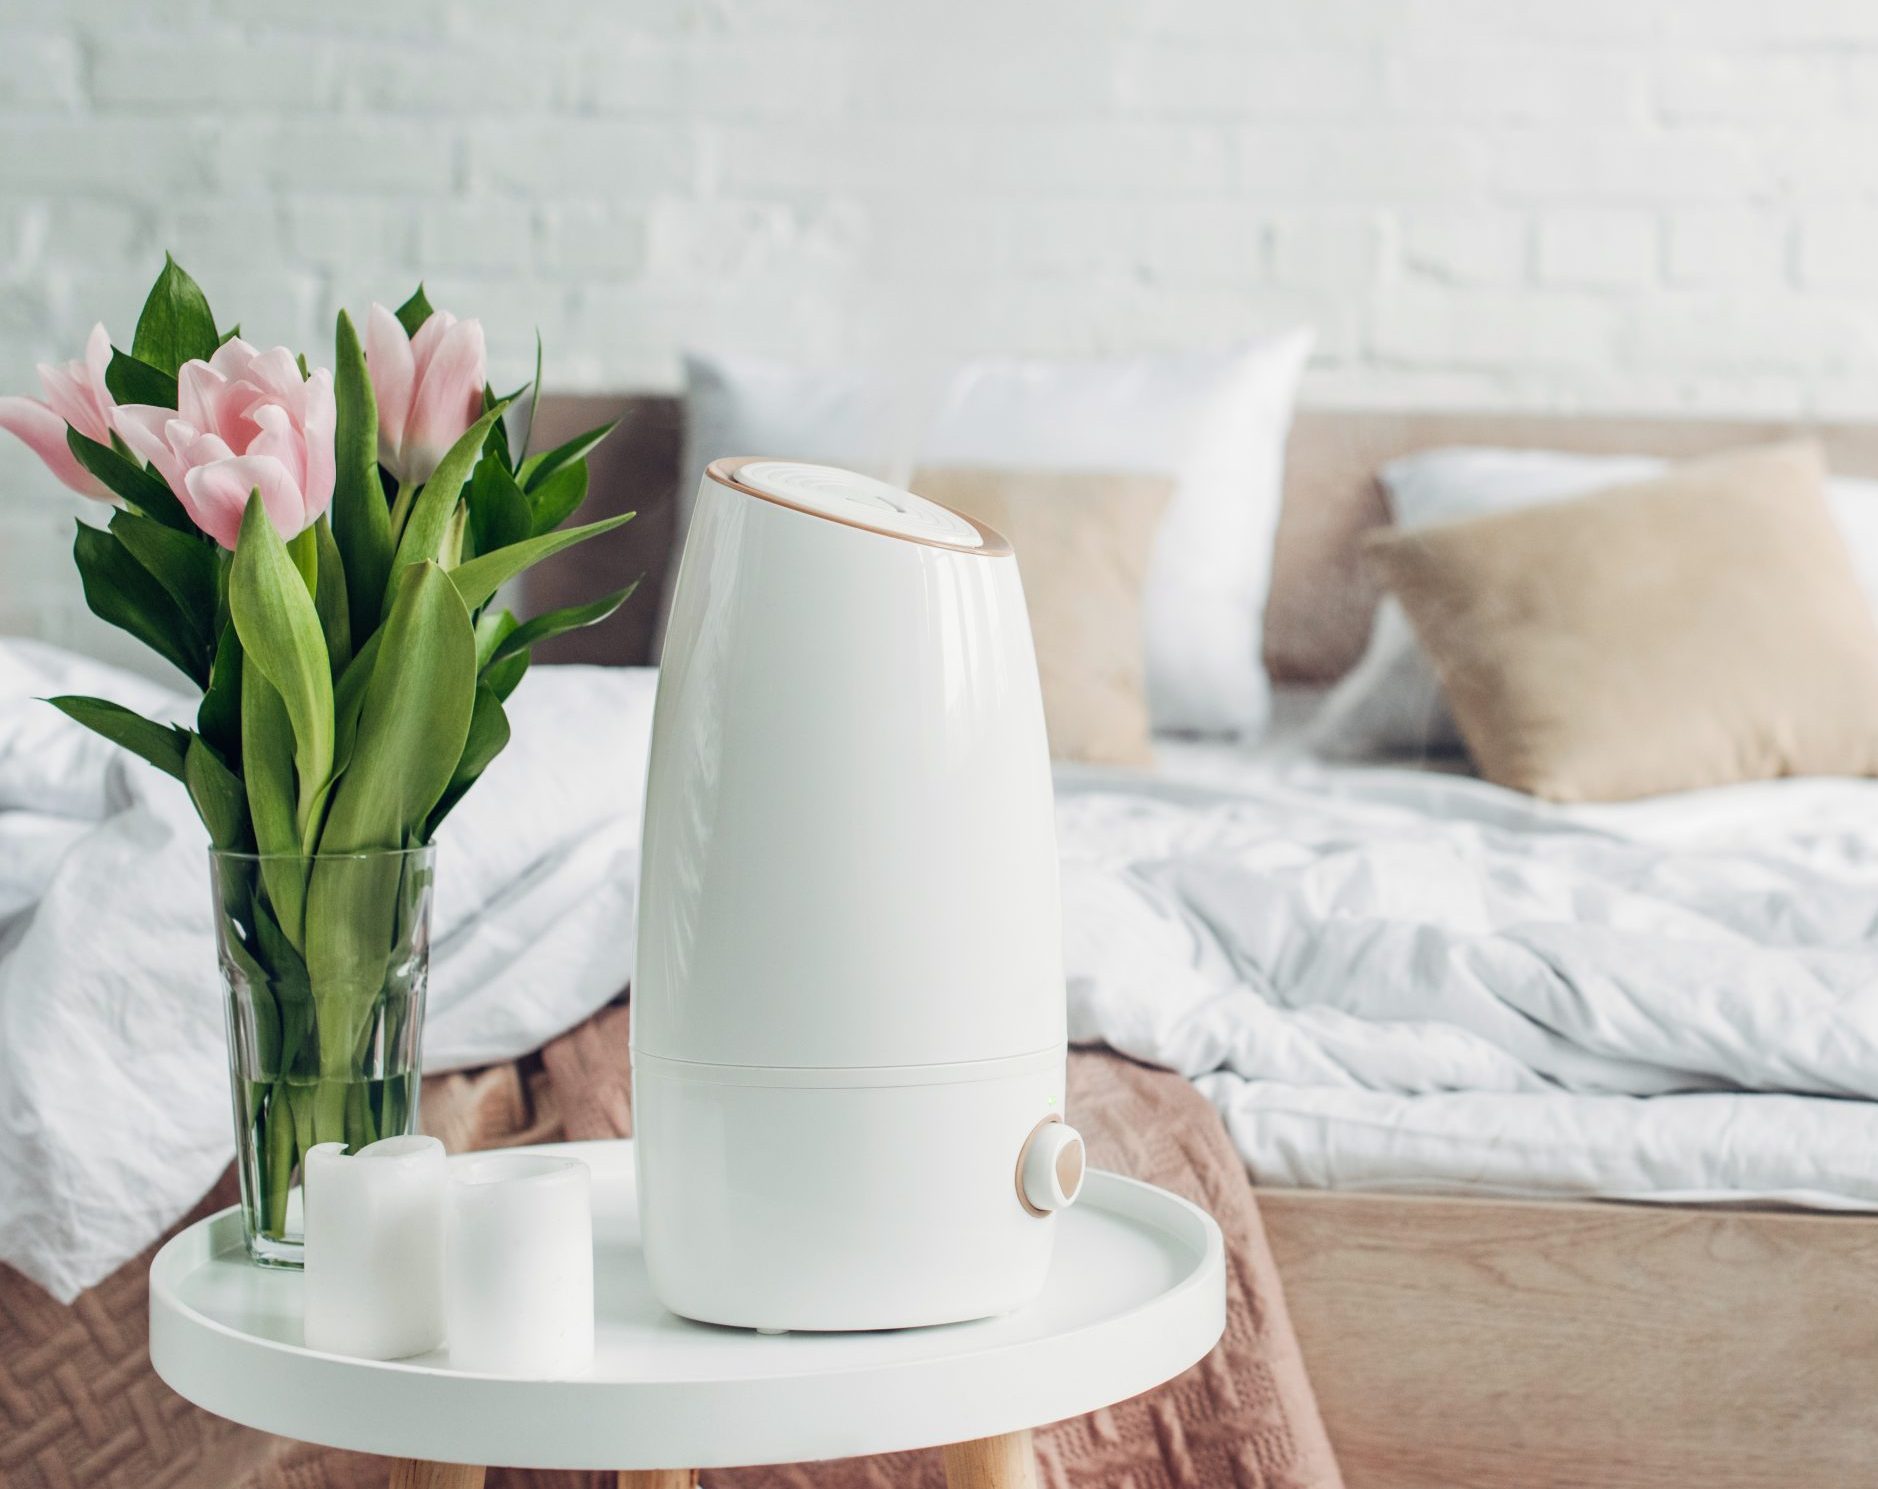 Did you know that a humidifier in your bedroom can improve your sleep quality and skin condition?